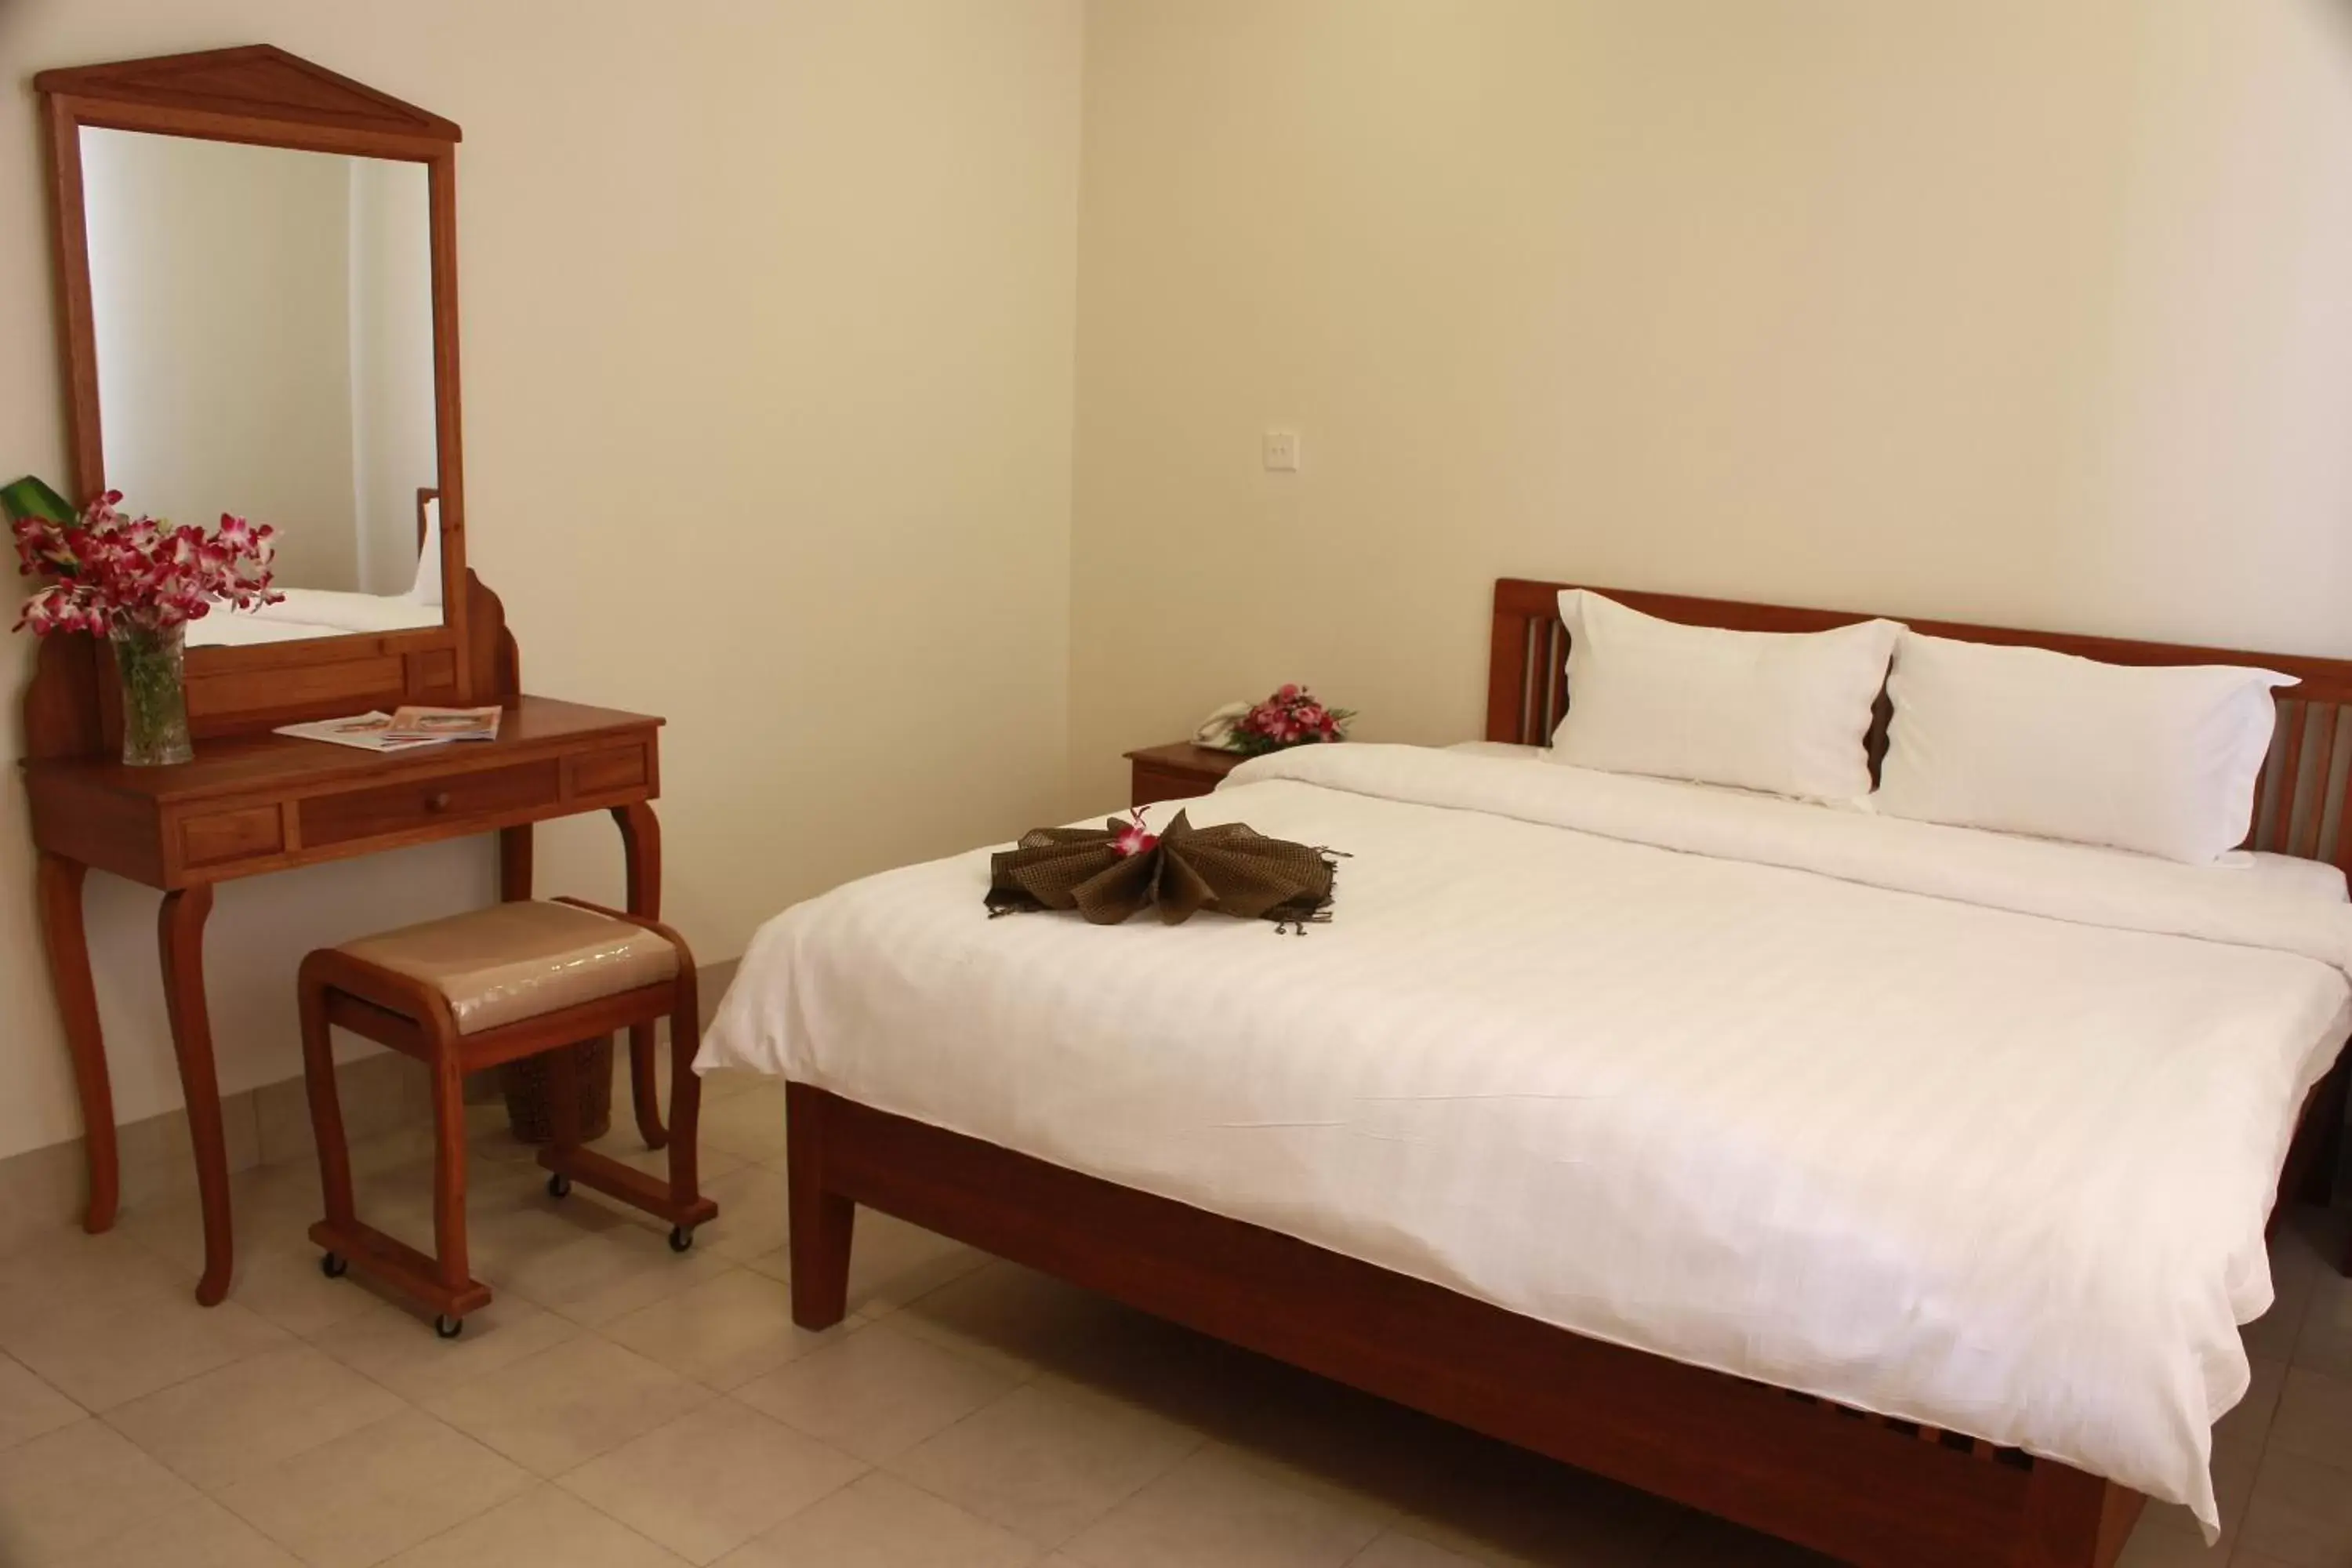 Bed, Room Photo in Lux Riverside Hotel & Apartment